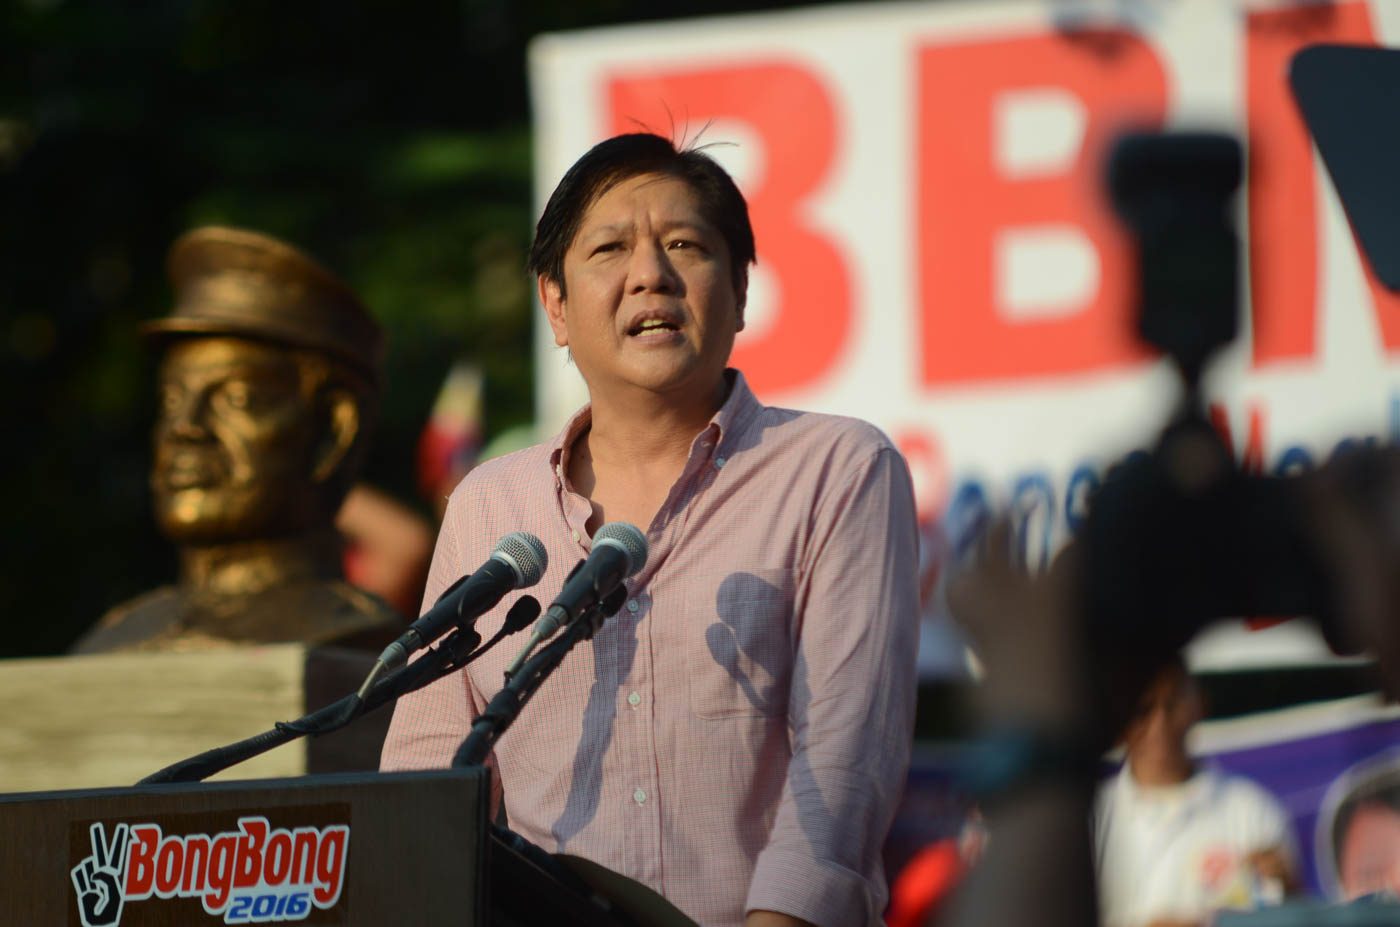 9 things to know about Bongbong Marcos